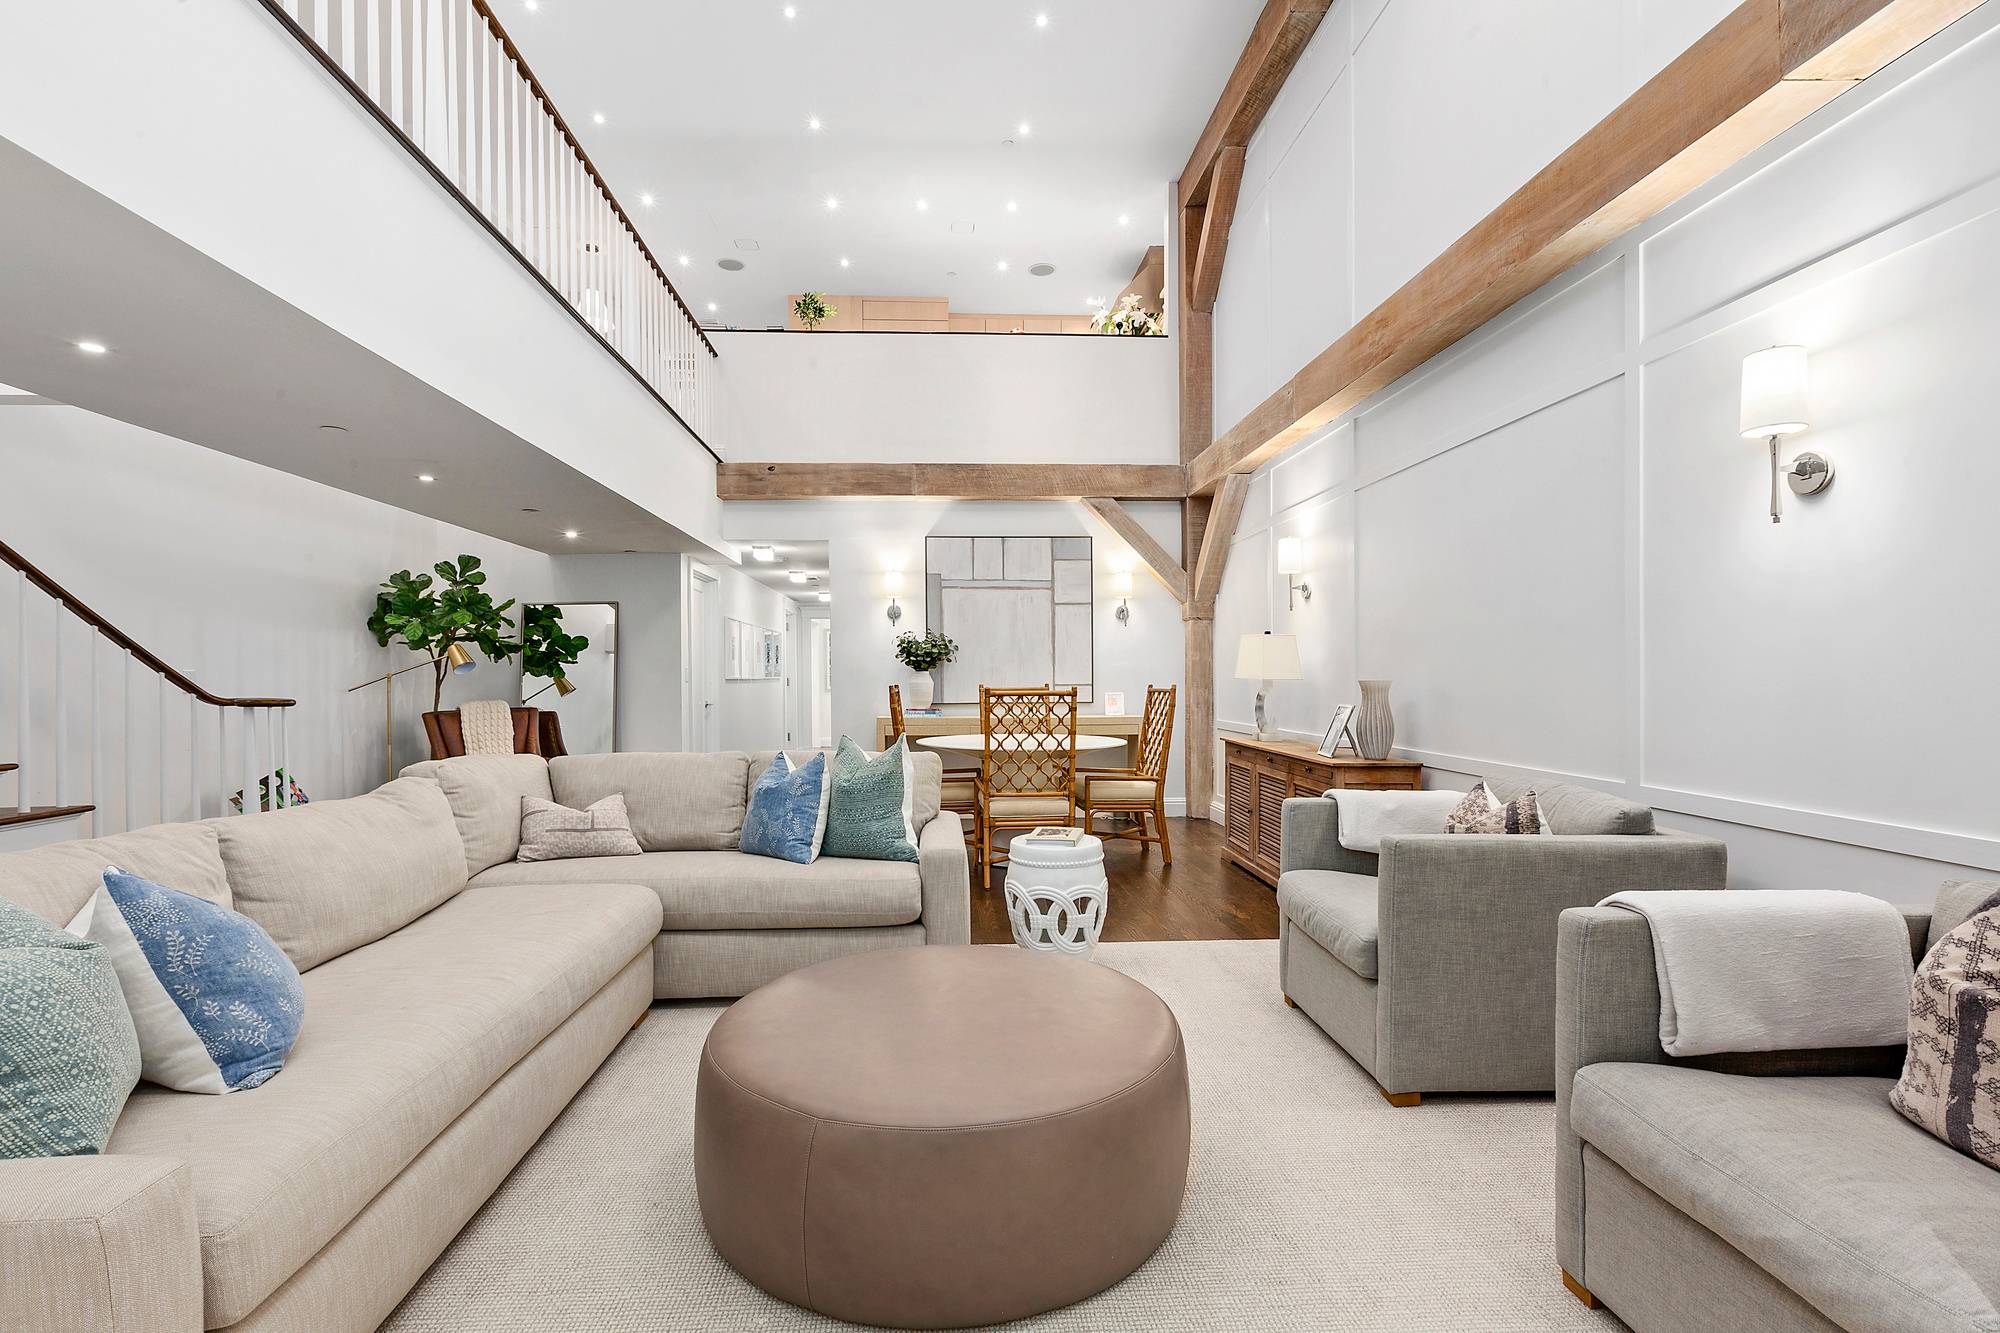 Meticulously renovated 3 4 Bedroom home office loft maisonette features the latest in smart home technology and offers indoor outdoor living on one of the quietest, most coveted cobblestone blocks ...